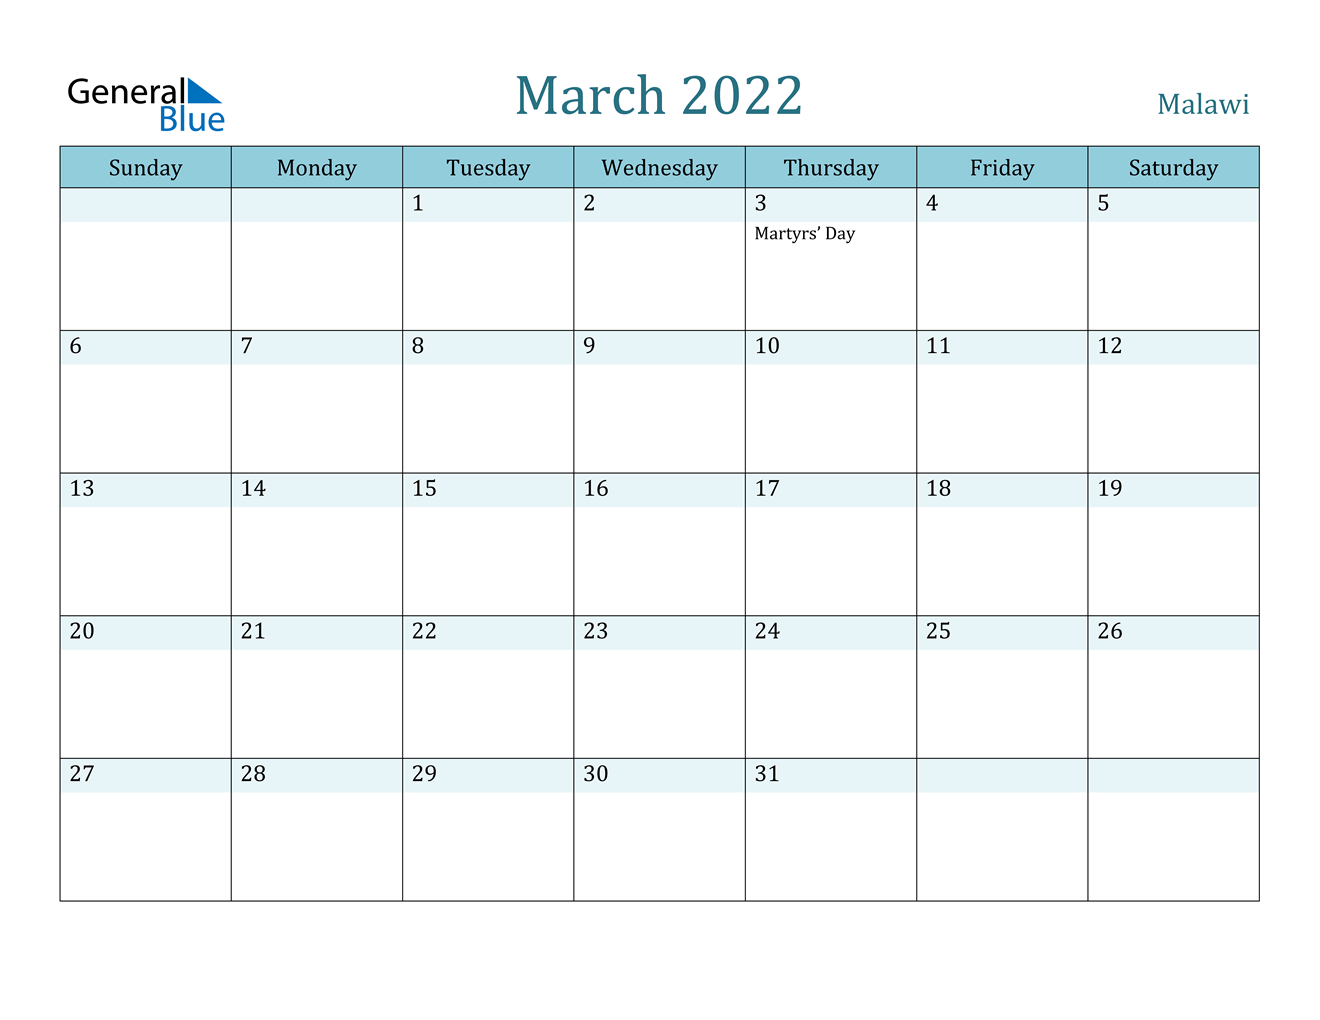 Take Calendar For March 2022